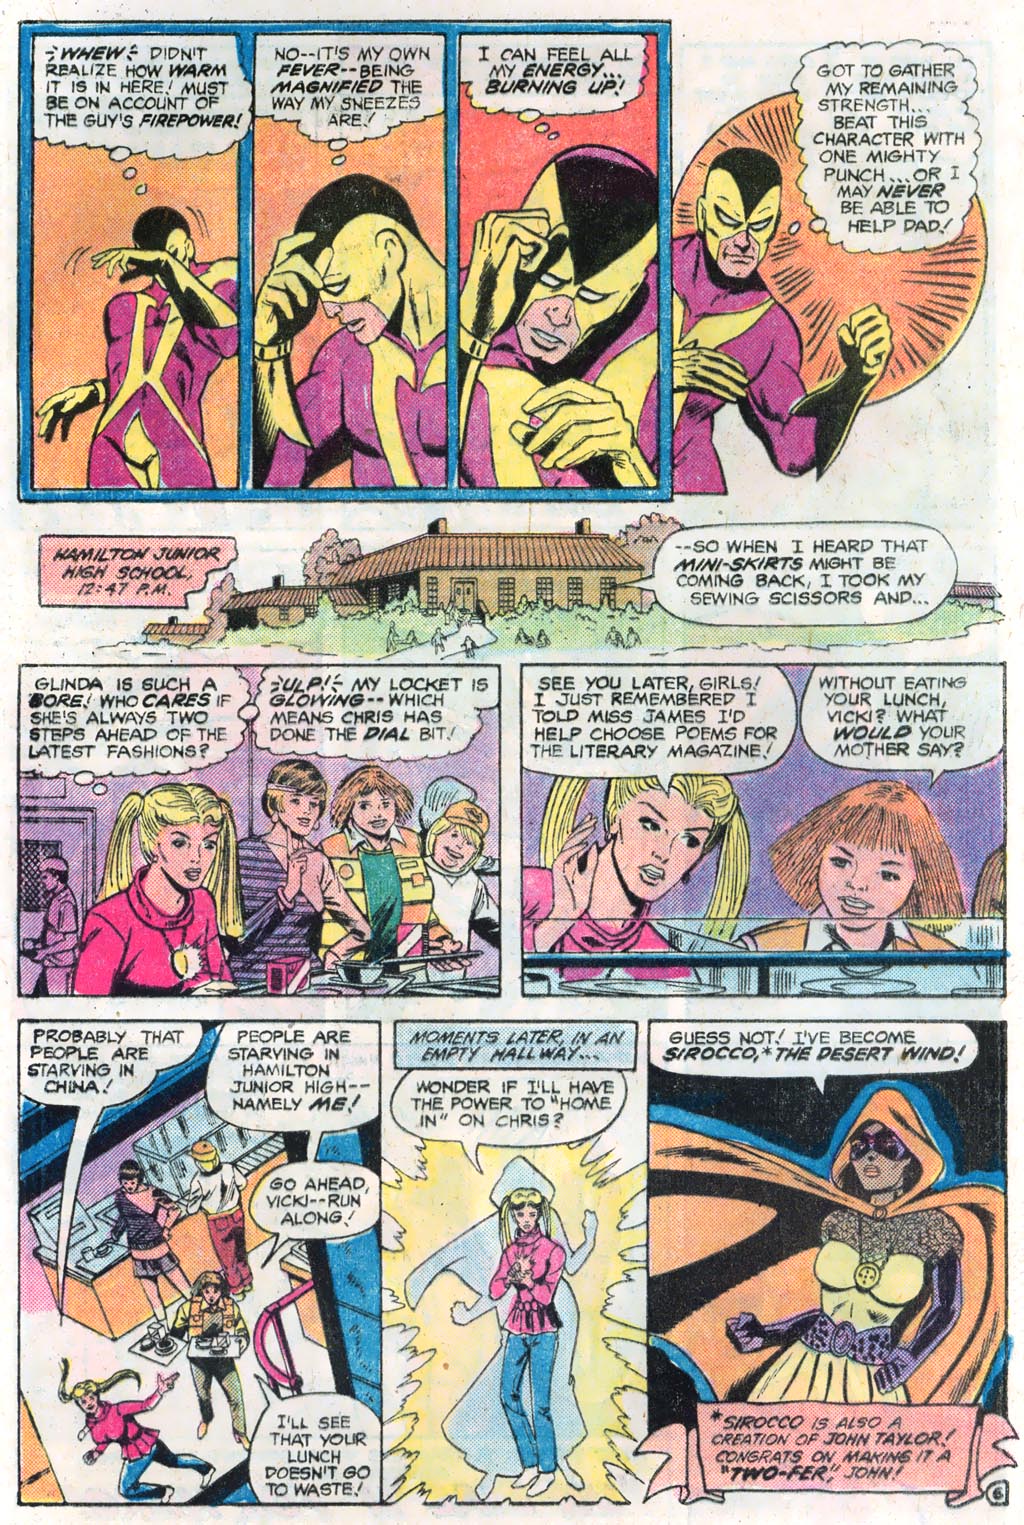 The New Adventures of Superboy 31 Page 32